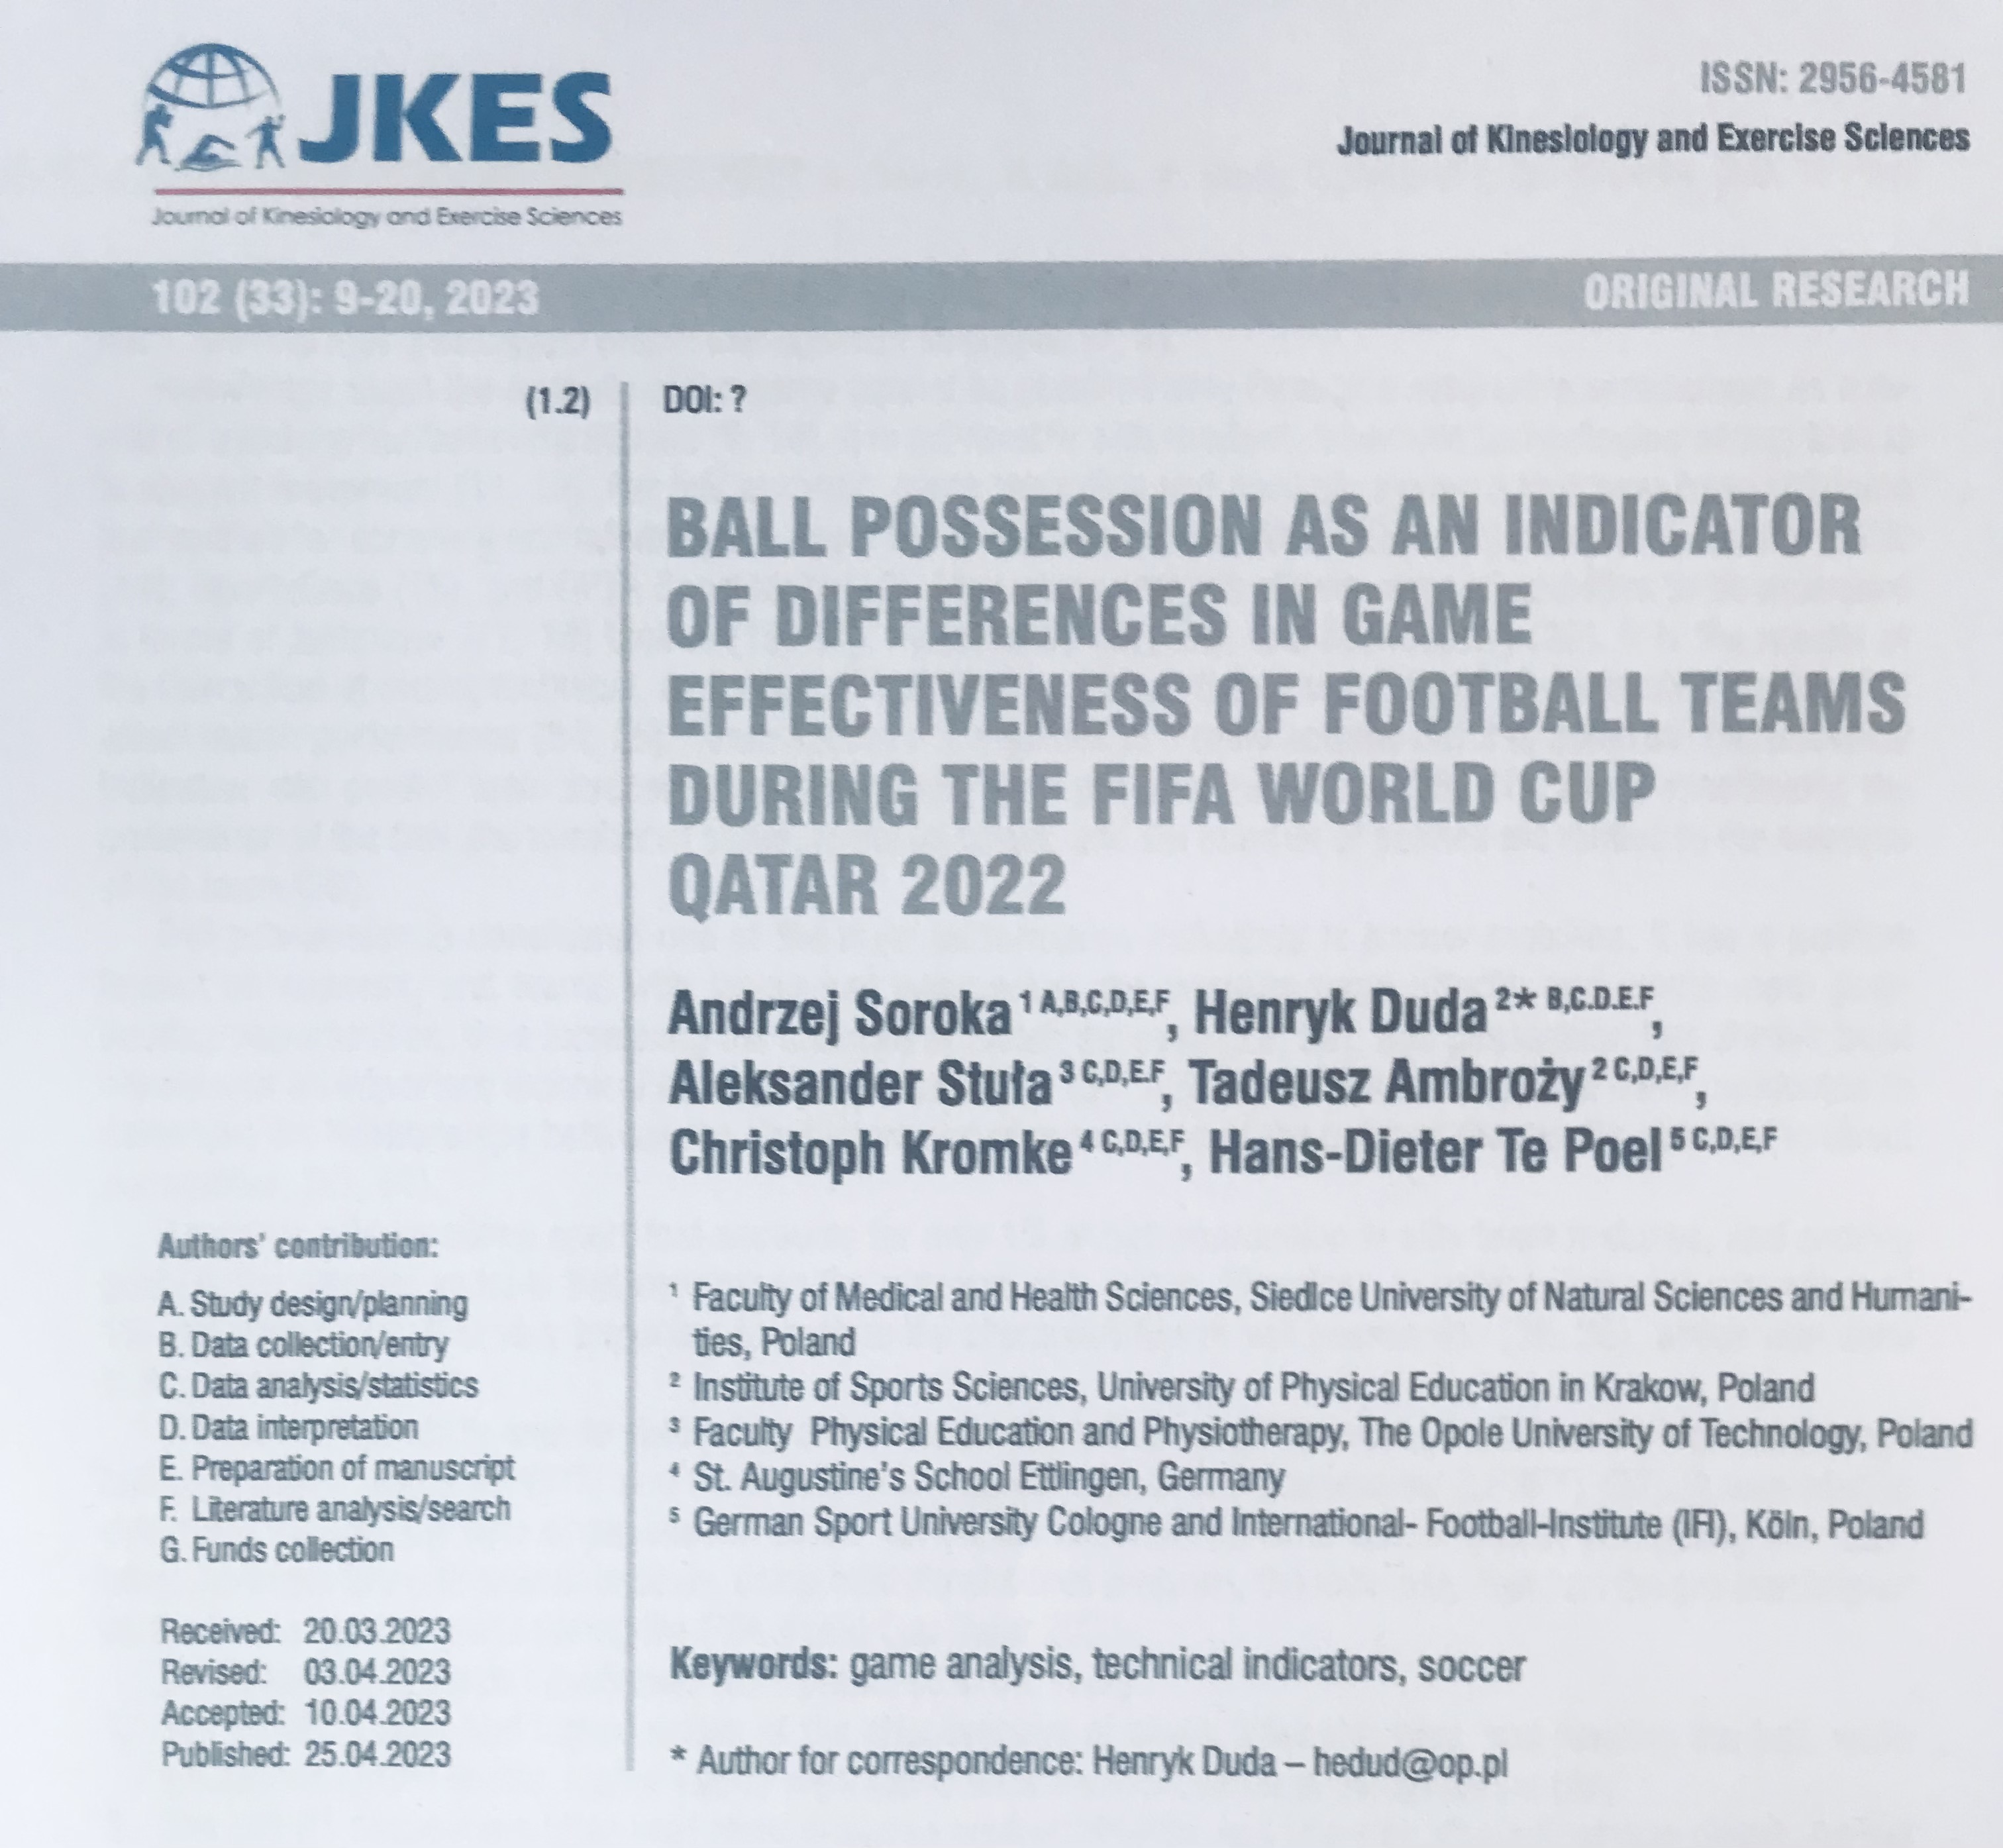 Ball possession as an indicator of differences in game effectiveness of football teams during the World Cup - Qatar 2022